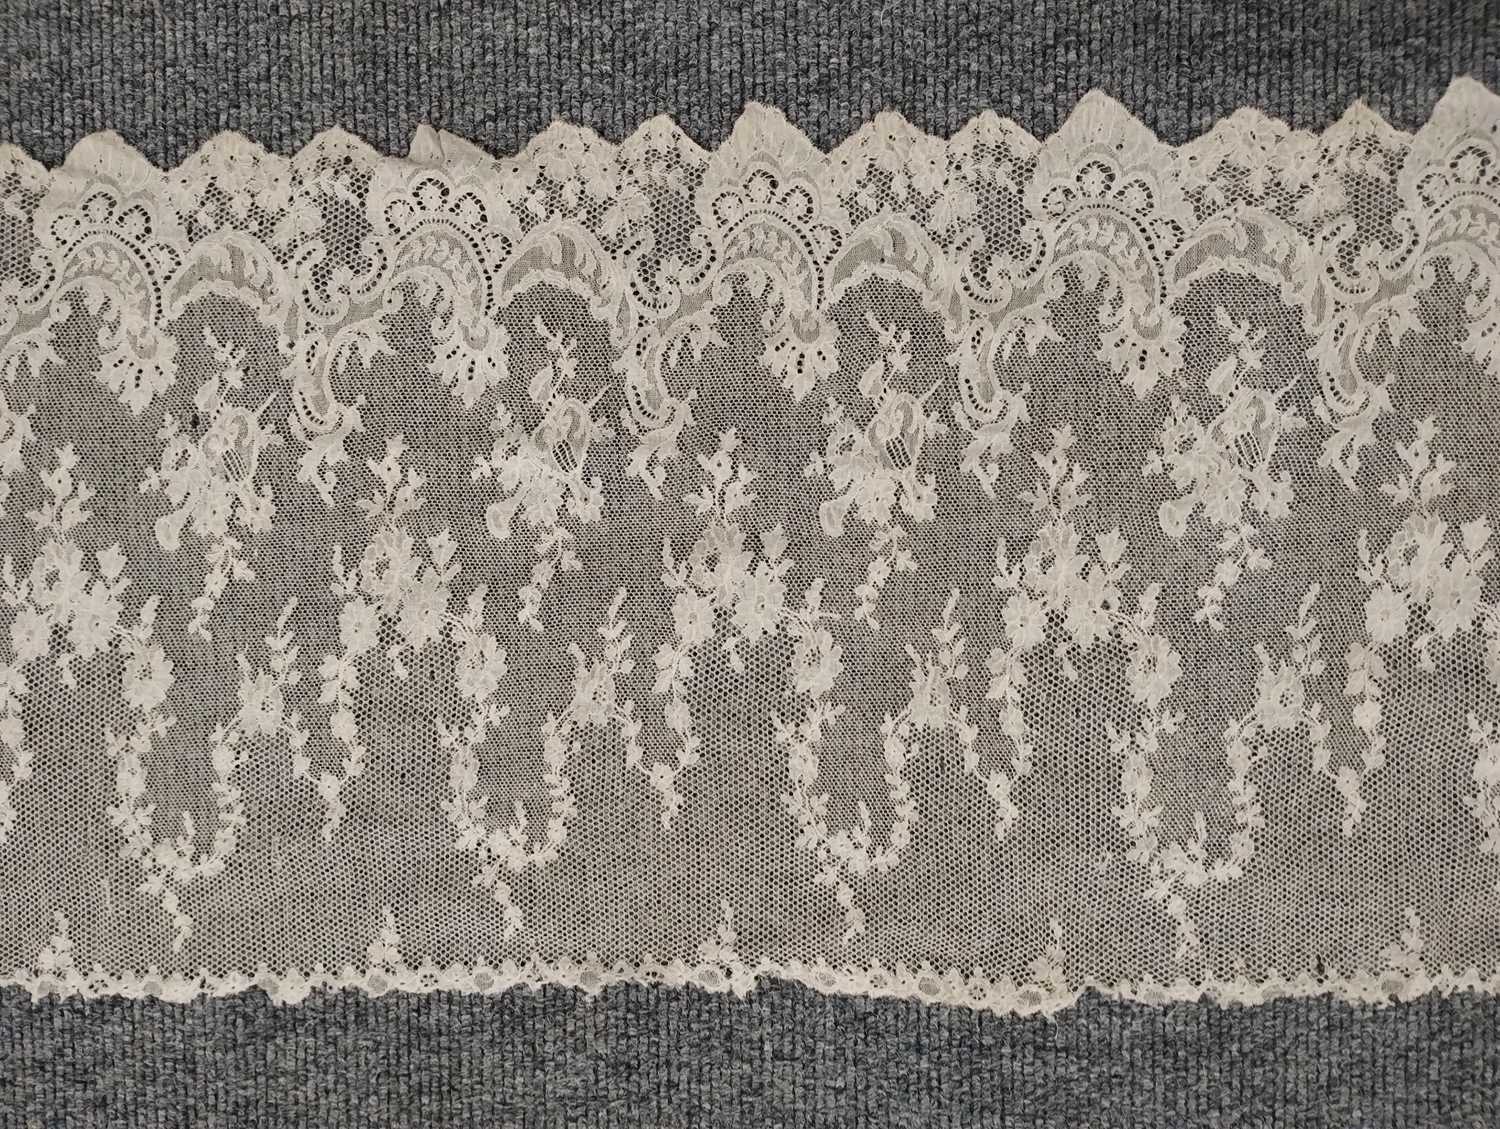 Early 20th Century Lace comprising a flounce with appliquéd flower heads and motifs within a - Image 7 of 32